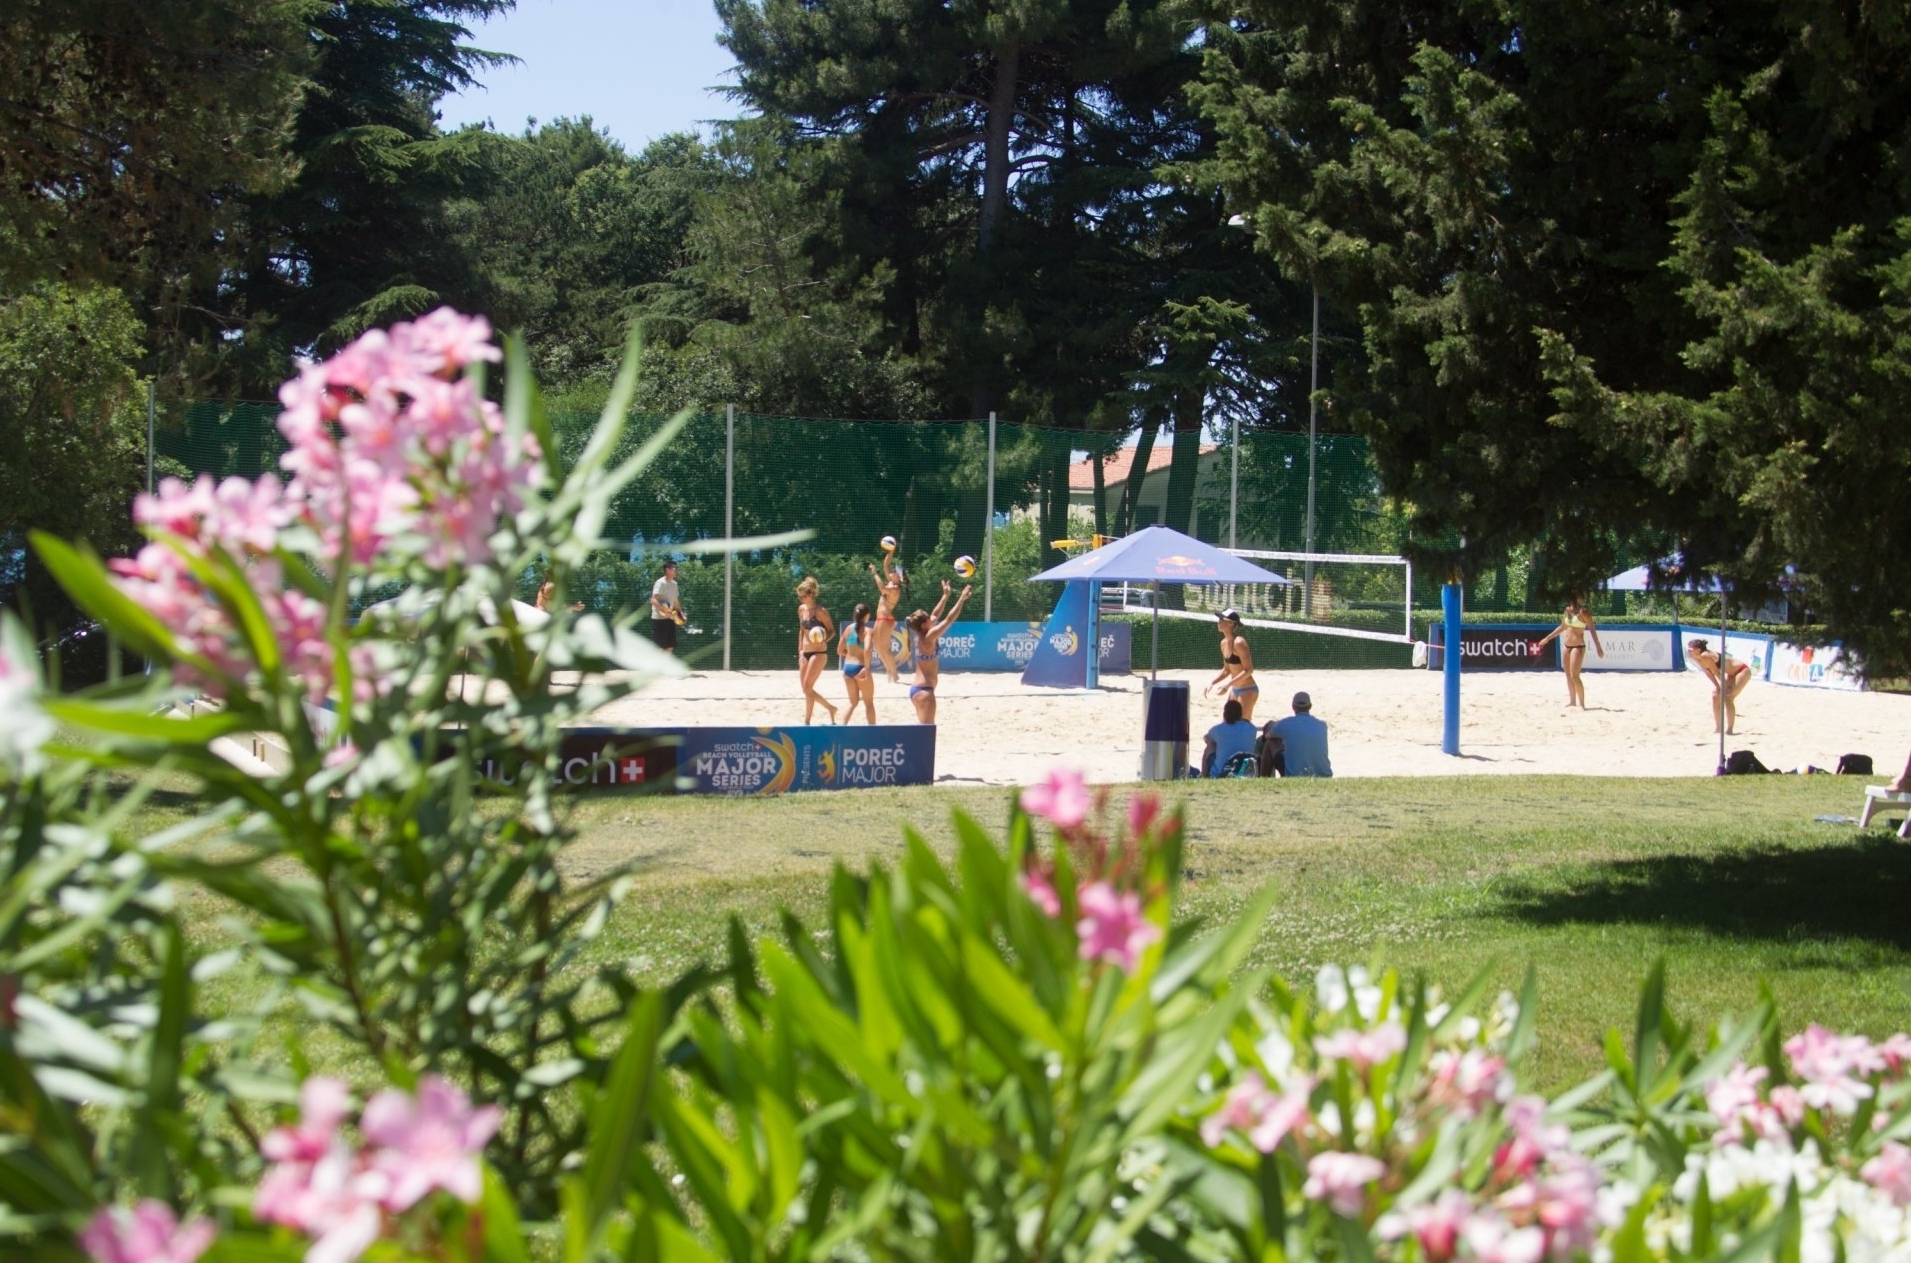 In among the trees at Side Courts 2 and 3 by the Valamar Zagreb Hotel